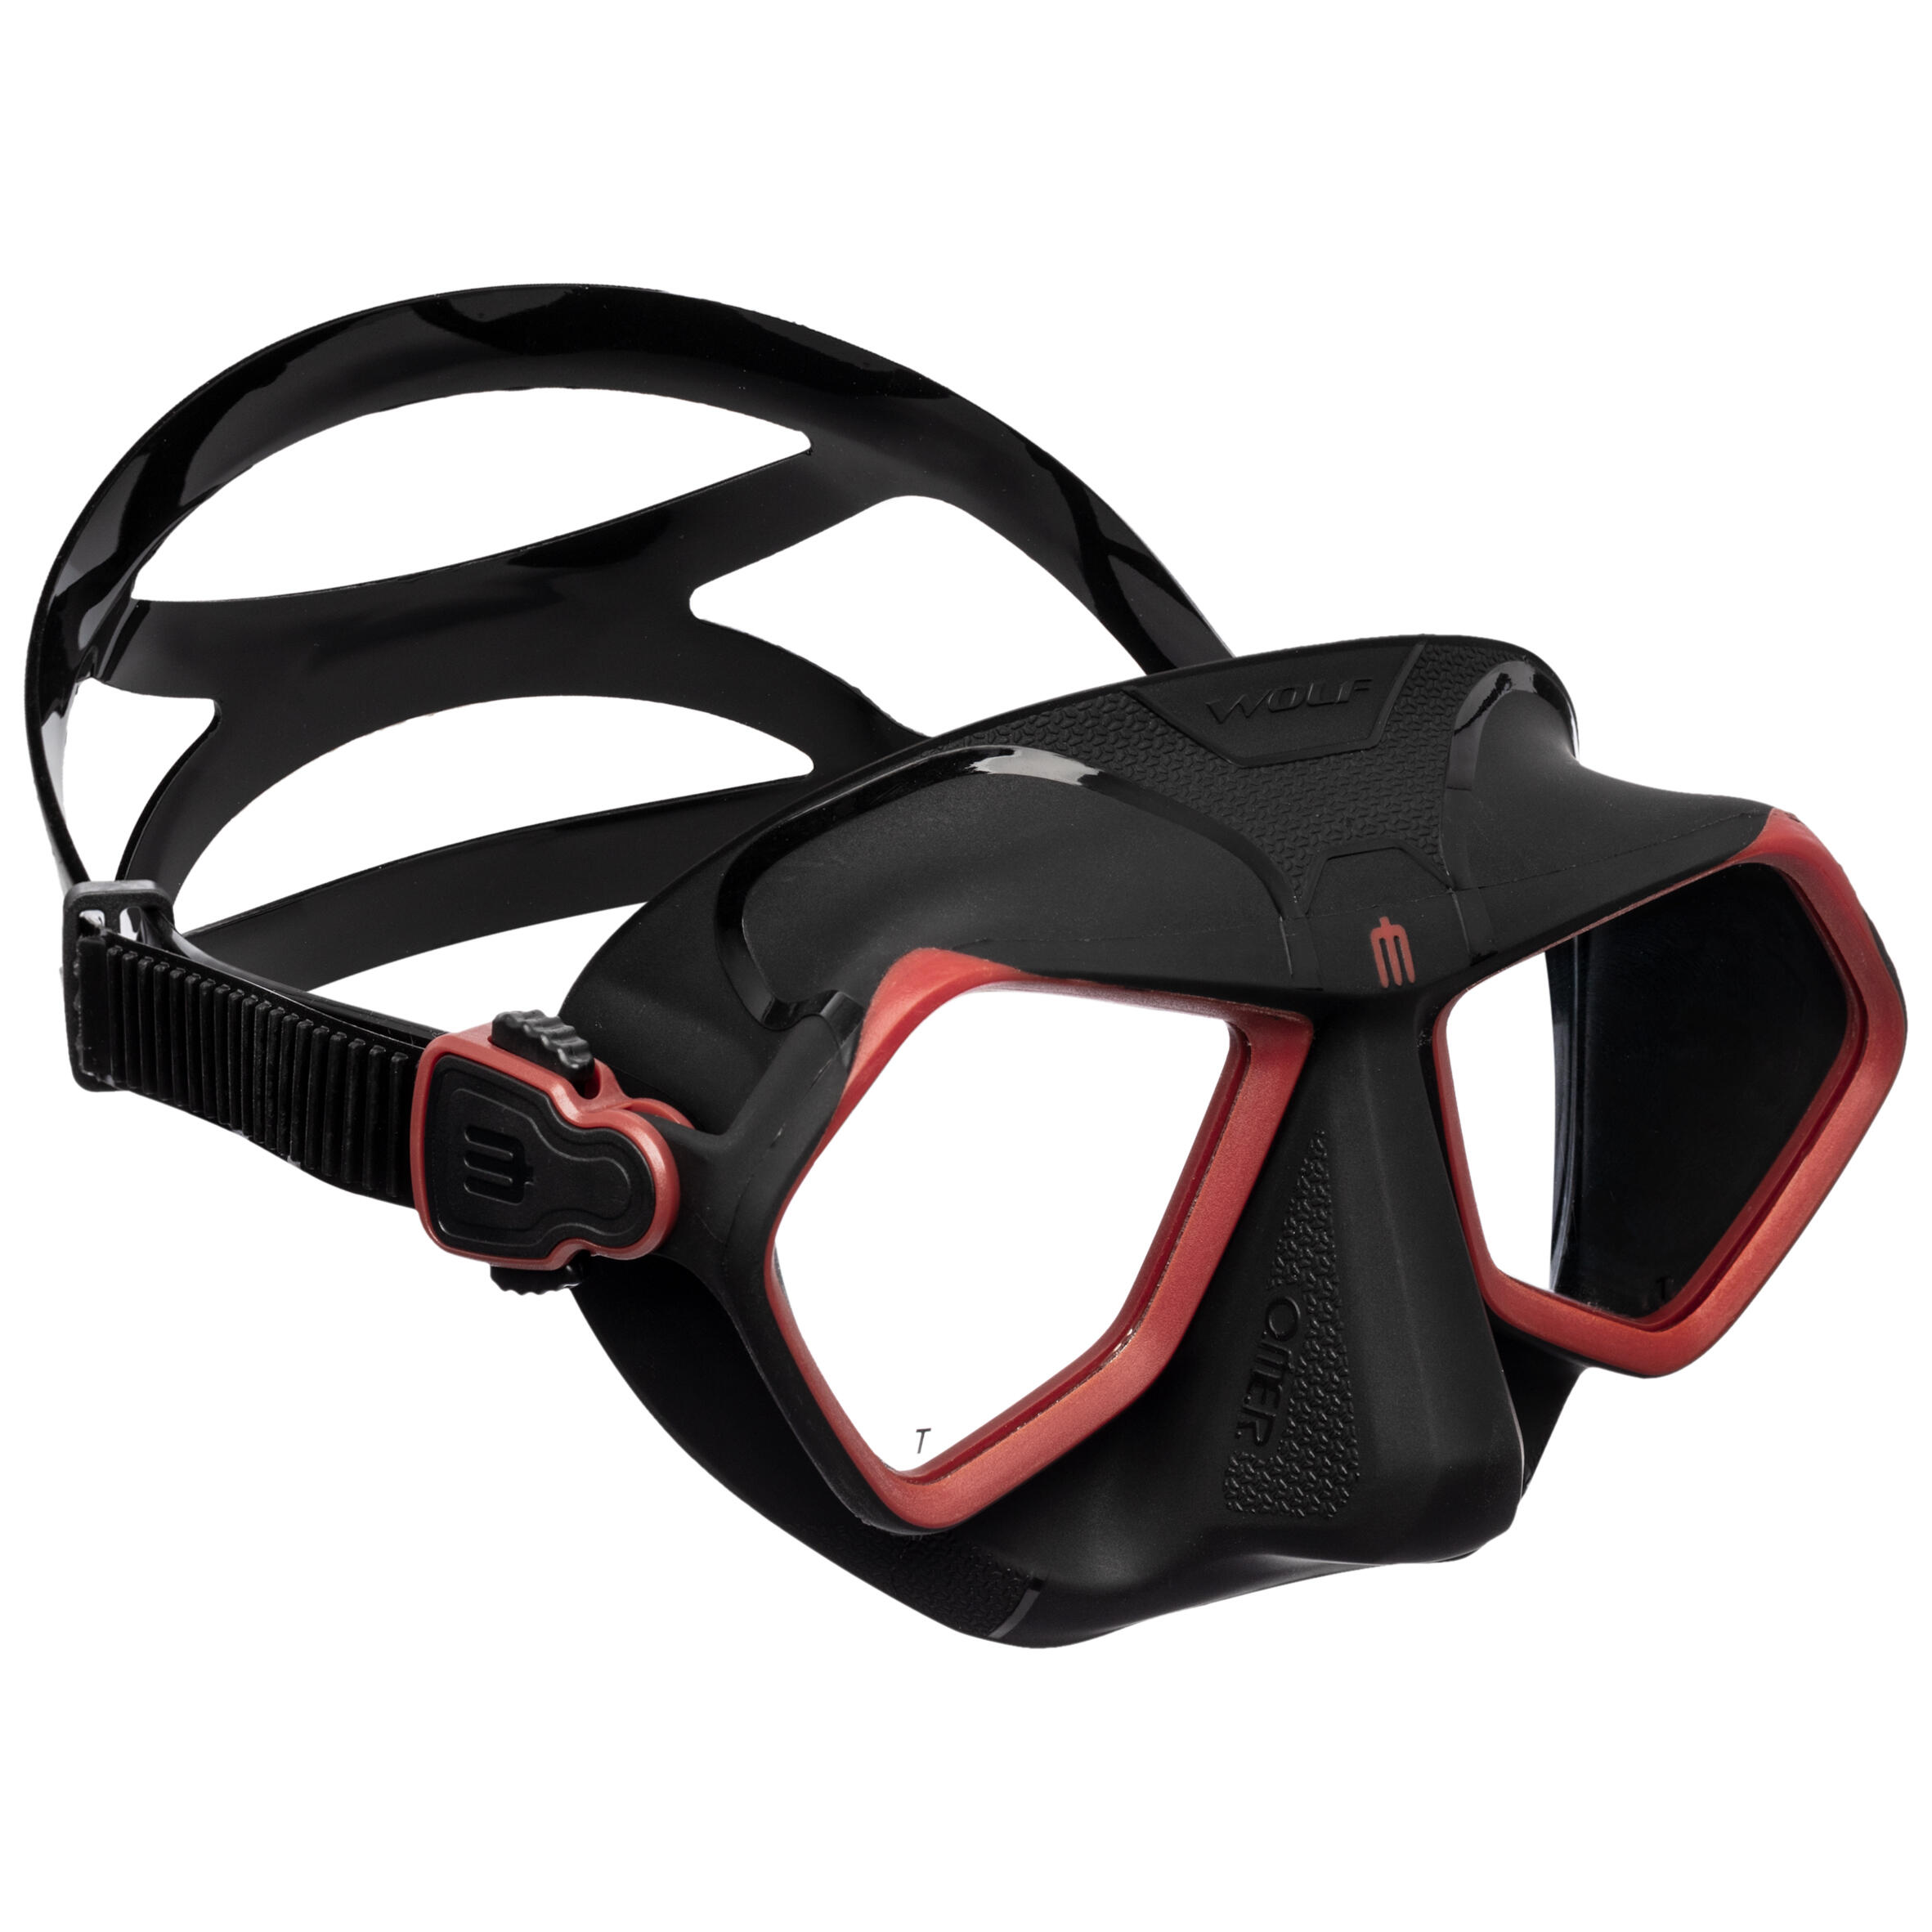 OMER SPEARFISHING AND FREEDIVING MASK WOLF - BLACK/RED